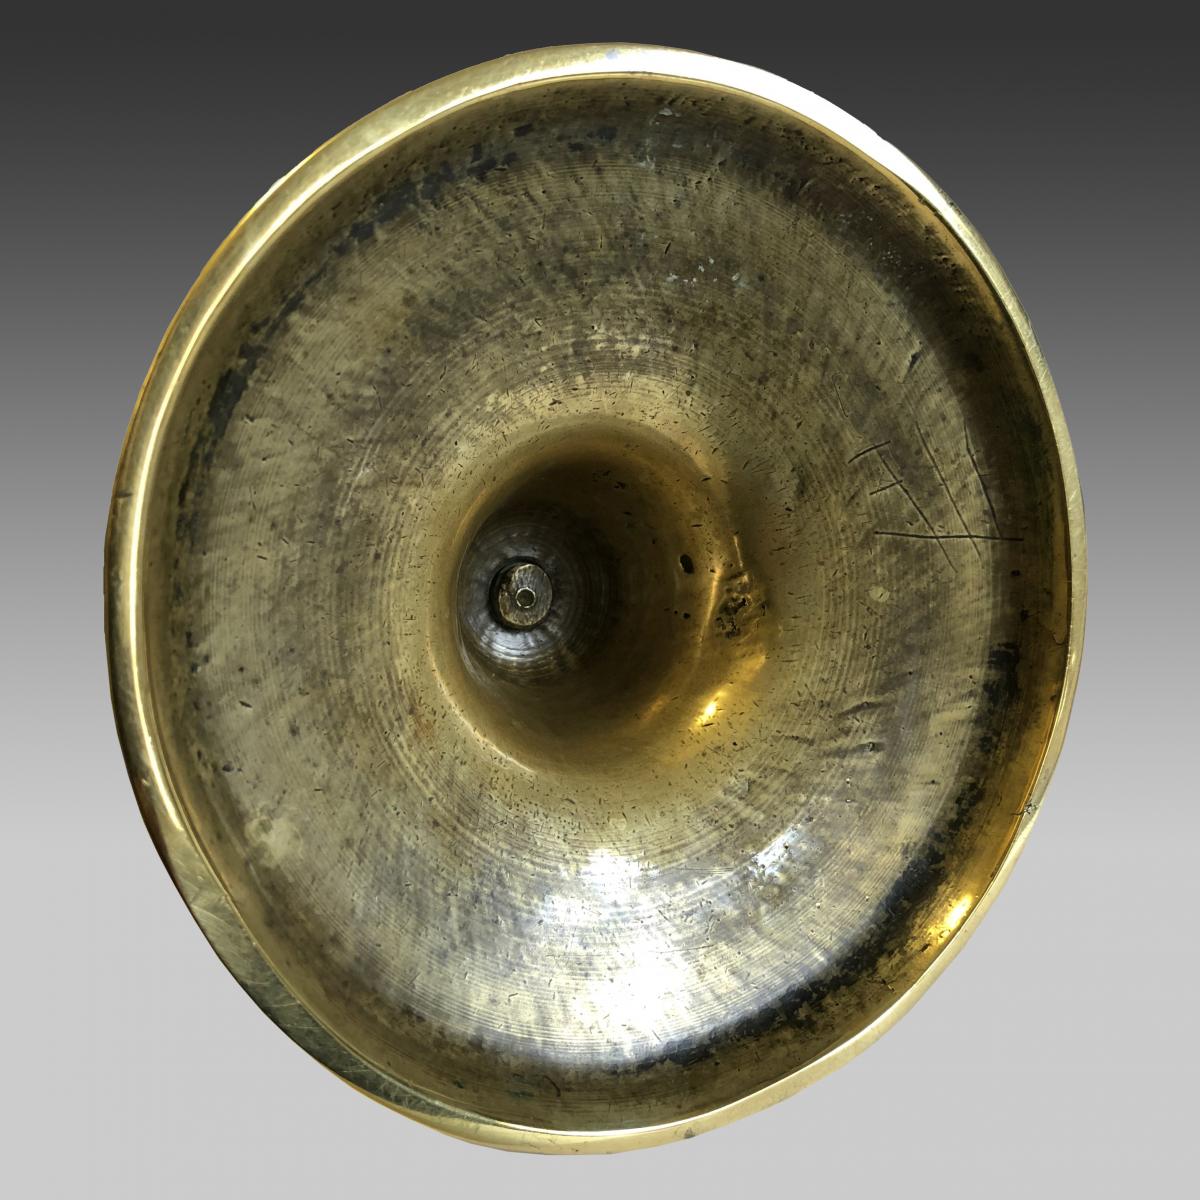 17th century Charles 11 trumpet-based brass candlestick